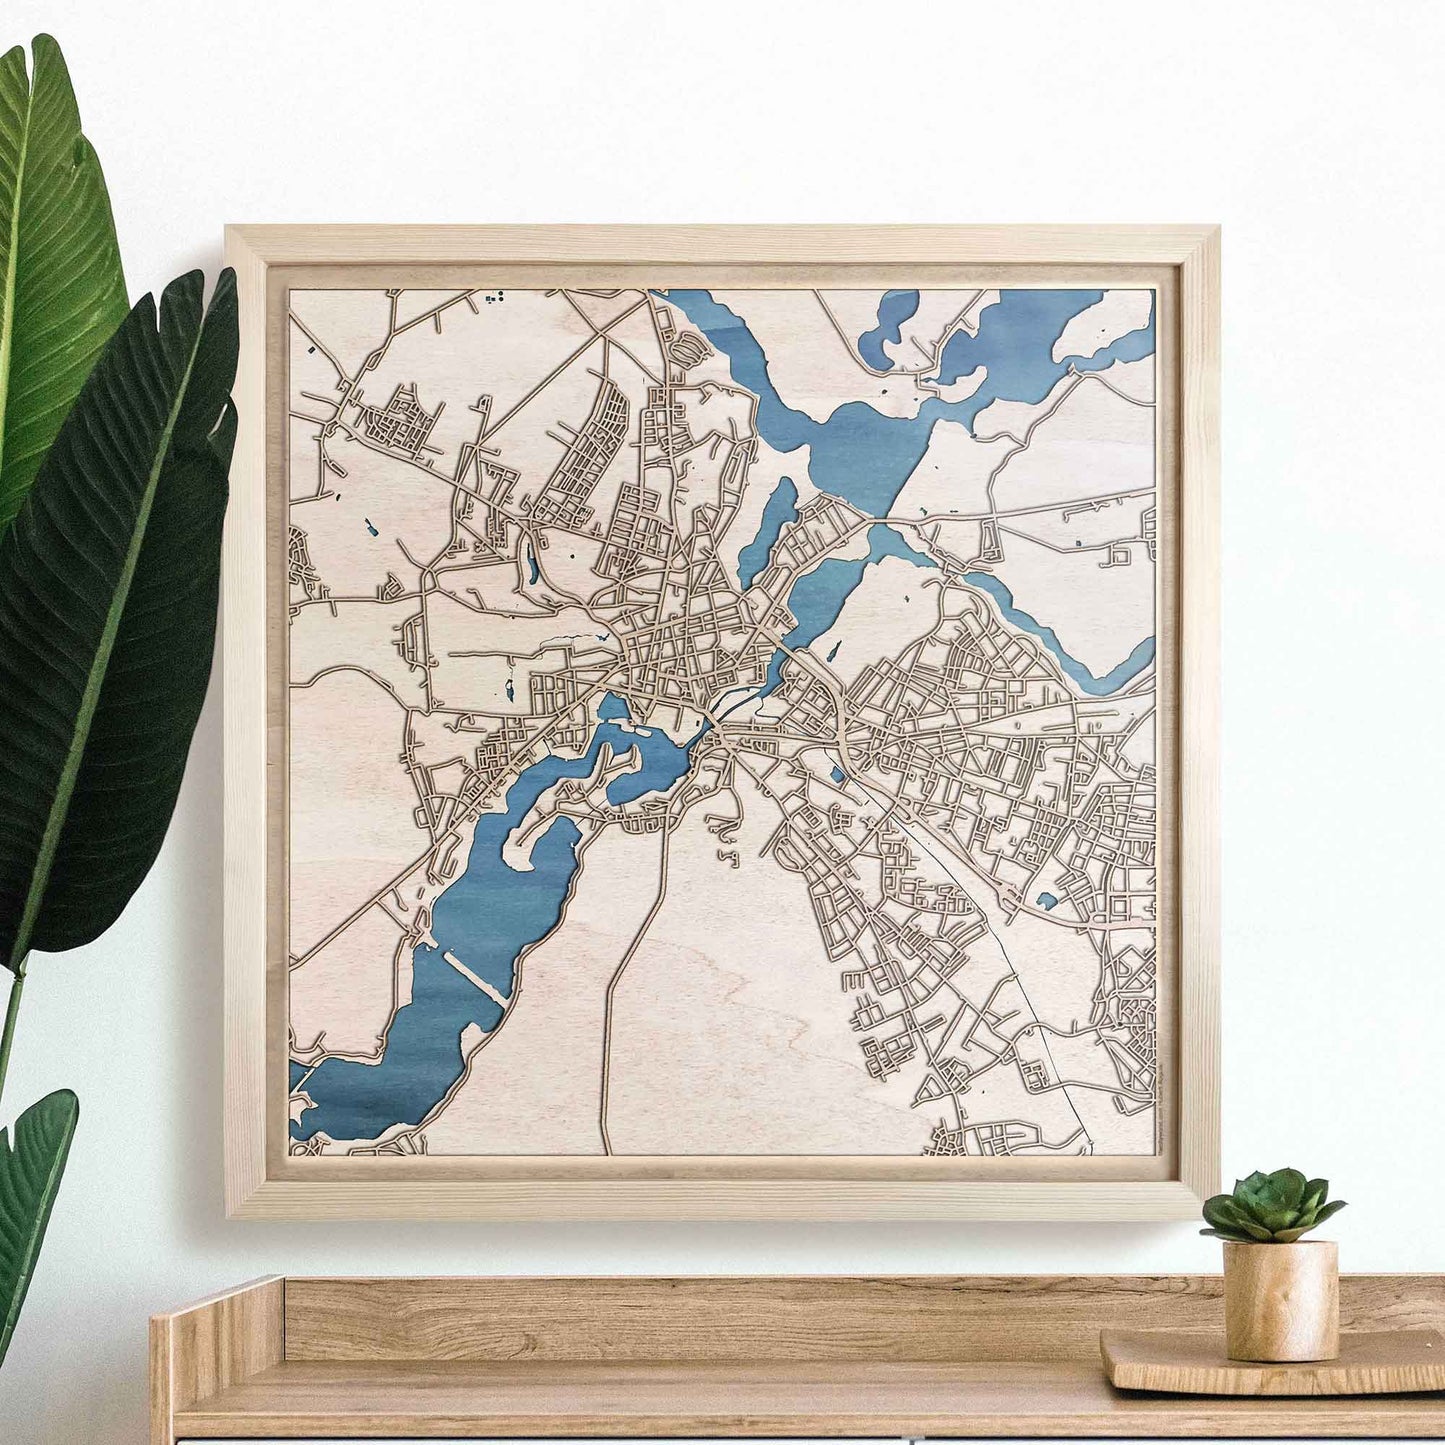 Potsdam Wooden Map by CityWood - Custom Wood Map Art - Unique Laser Cut Engraved - Anniversary Gift